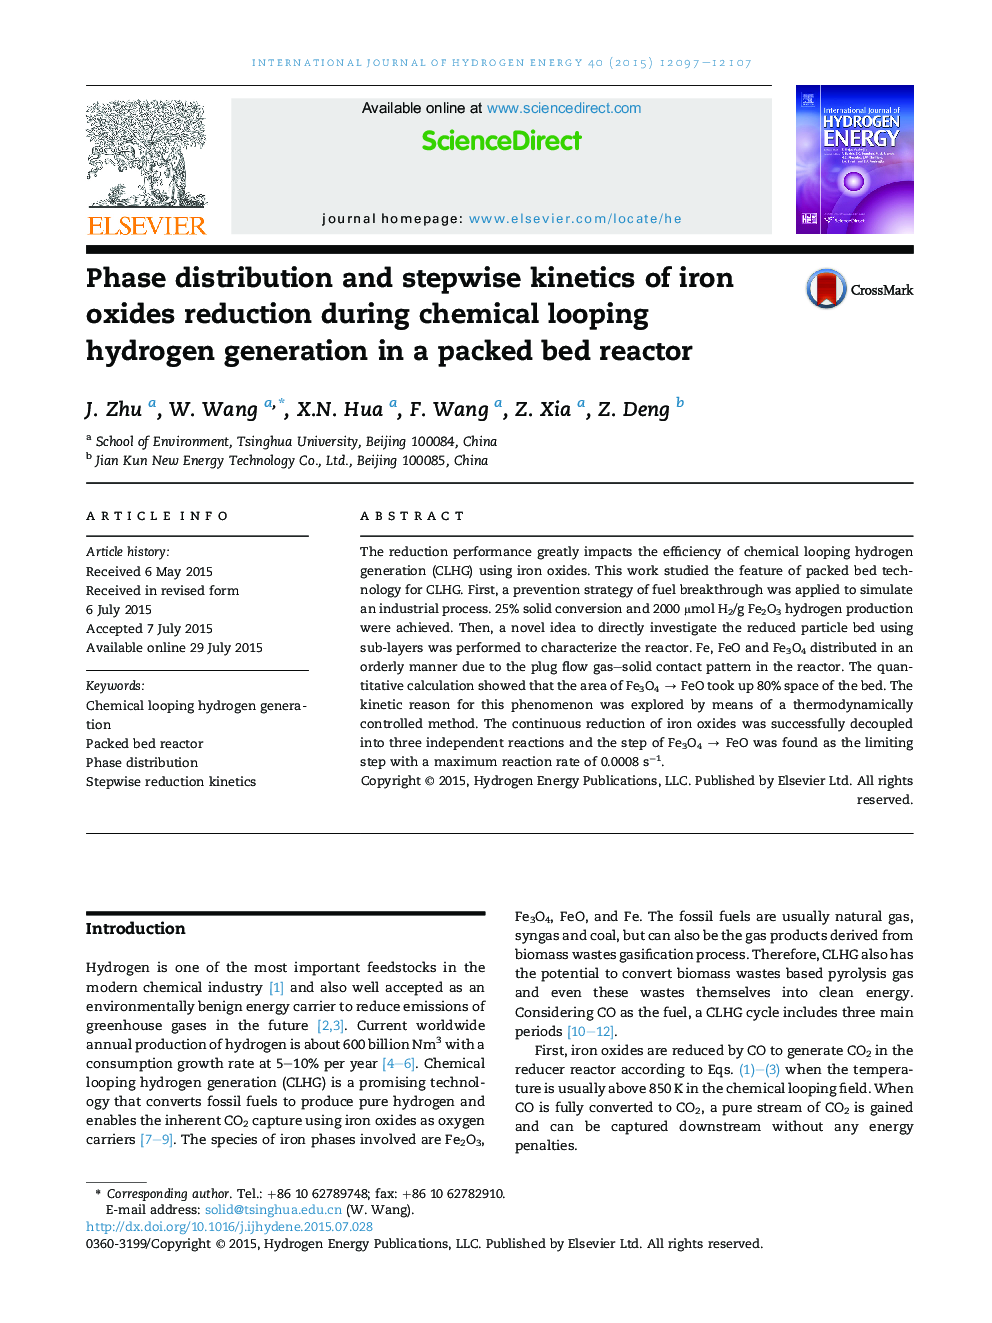 Phase distribution and stepwise kinetics of iron oxides reduction during chemical looping hydrogen generation in a packed bed reactor